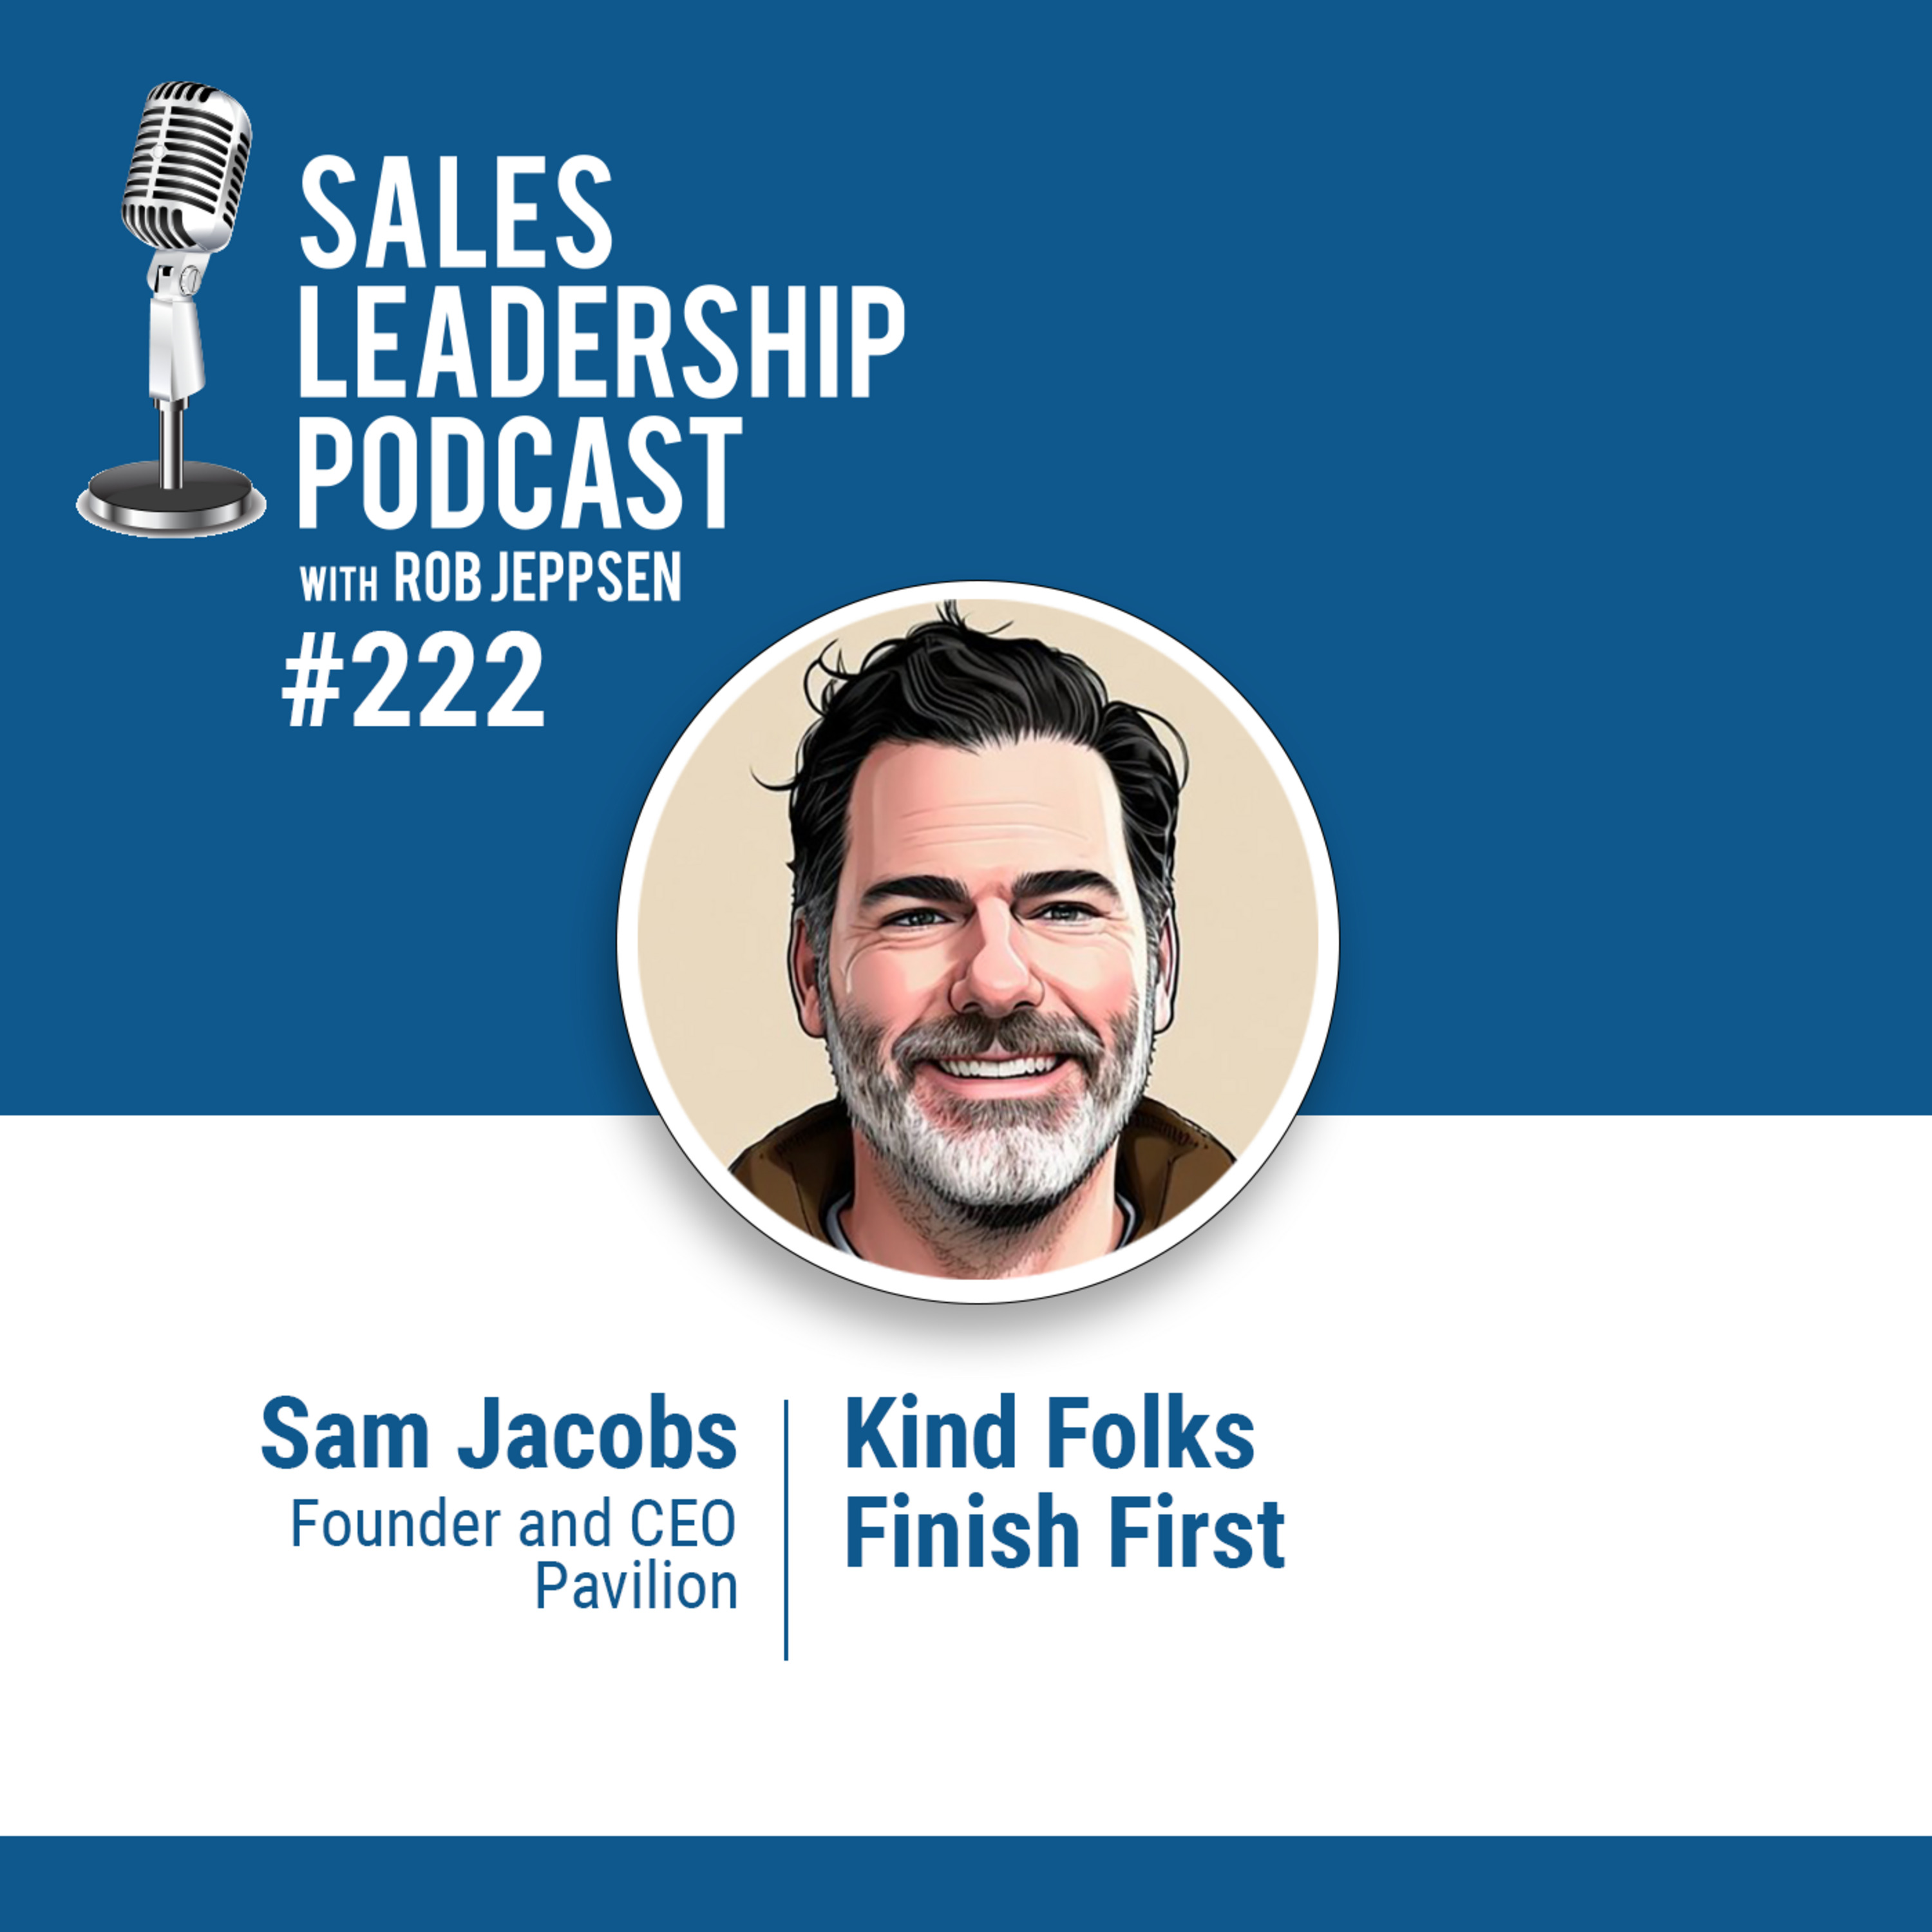 Episode 223: Sam Jacobs, Founder and CEO of Pavilion — Kind Folks Finish First